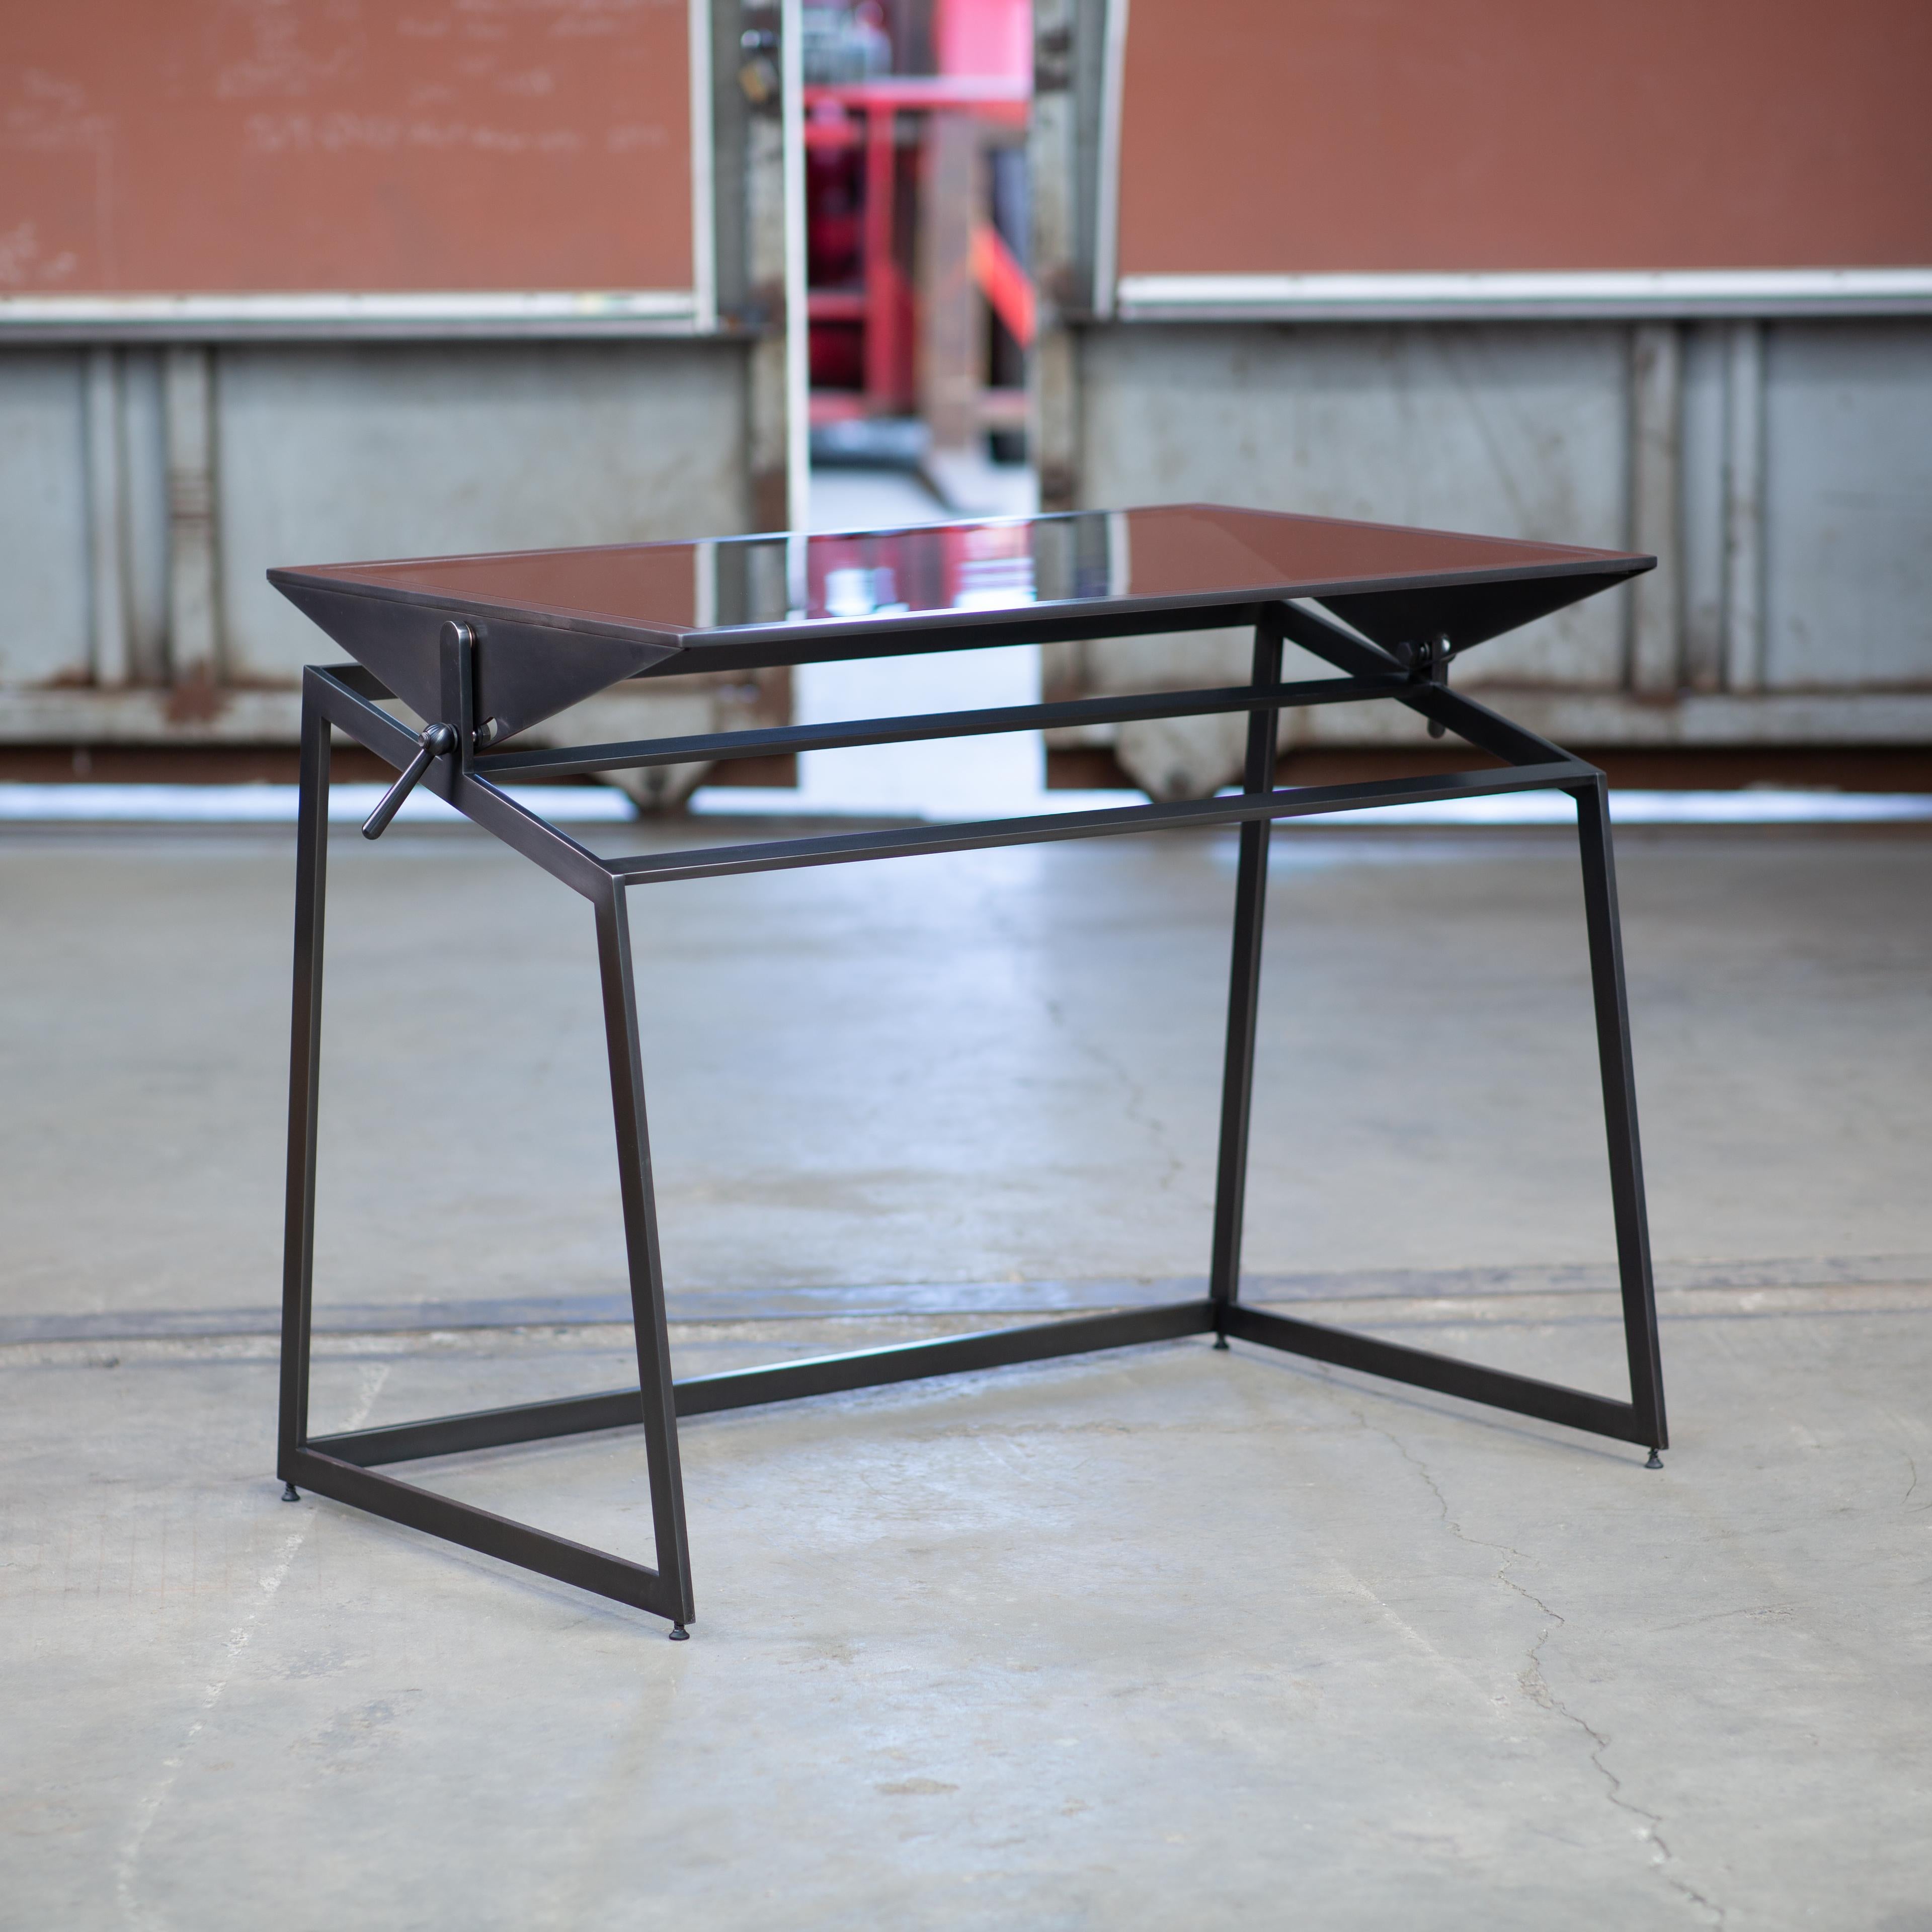 American Drafting Table and Utility Cart, Blackened Steel and Gray Glass by Force/Collide For Sale